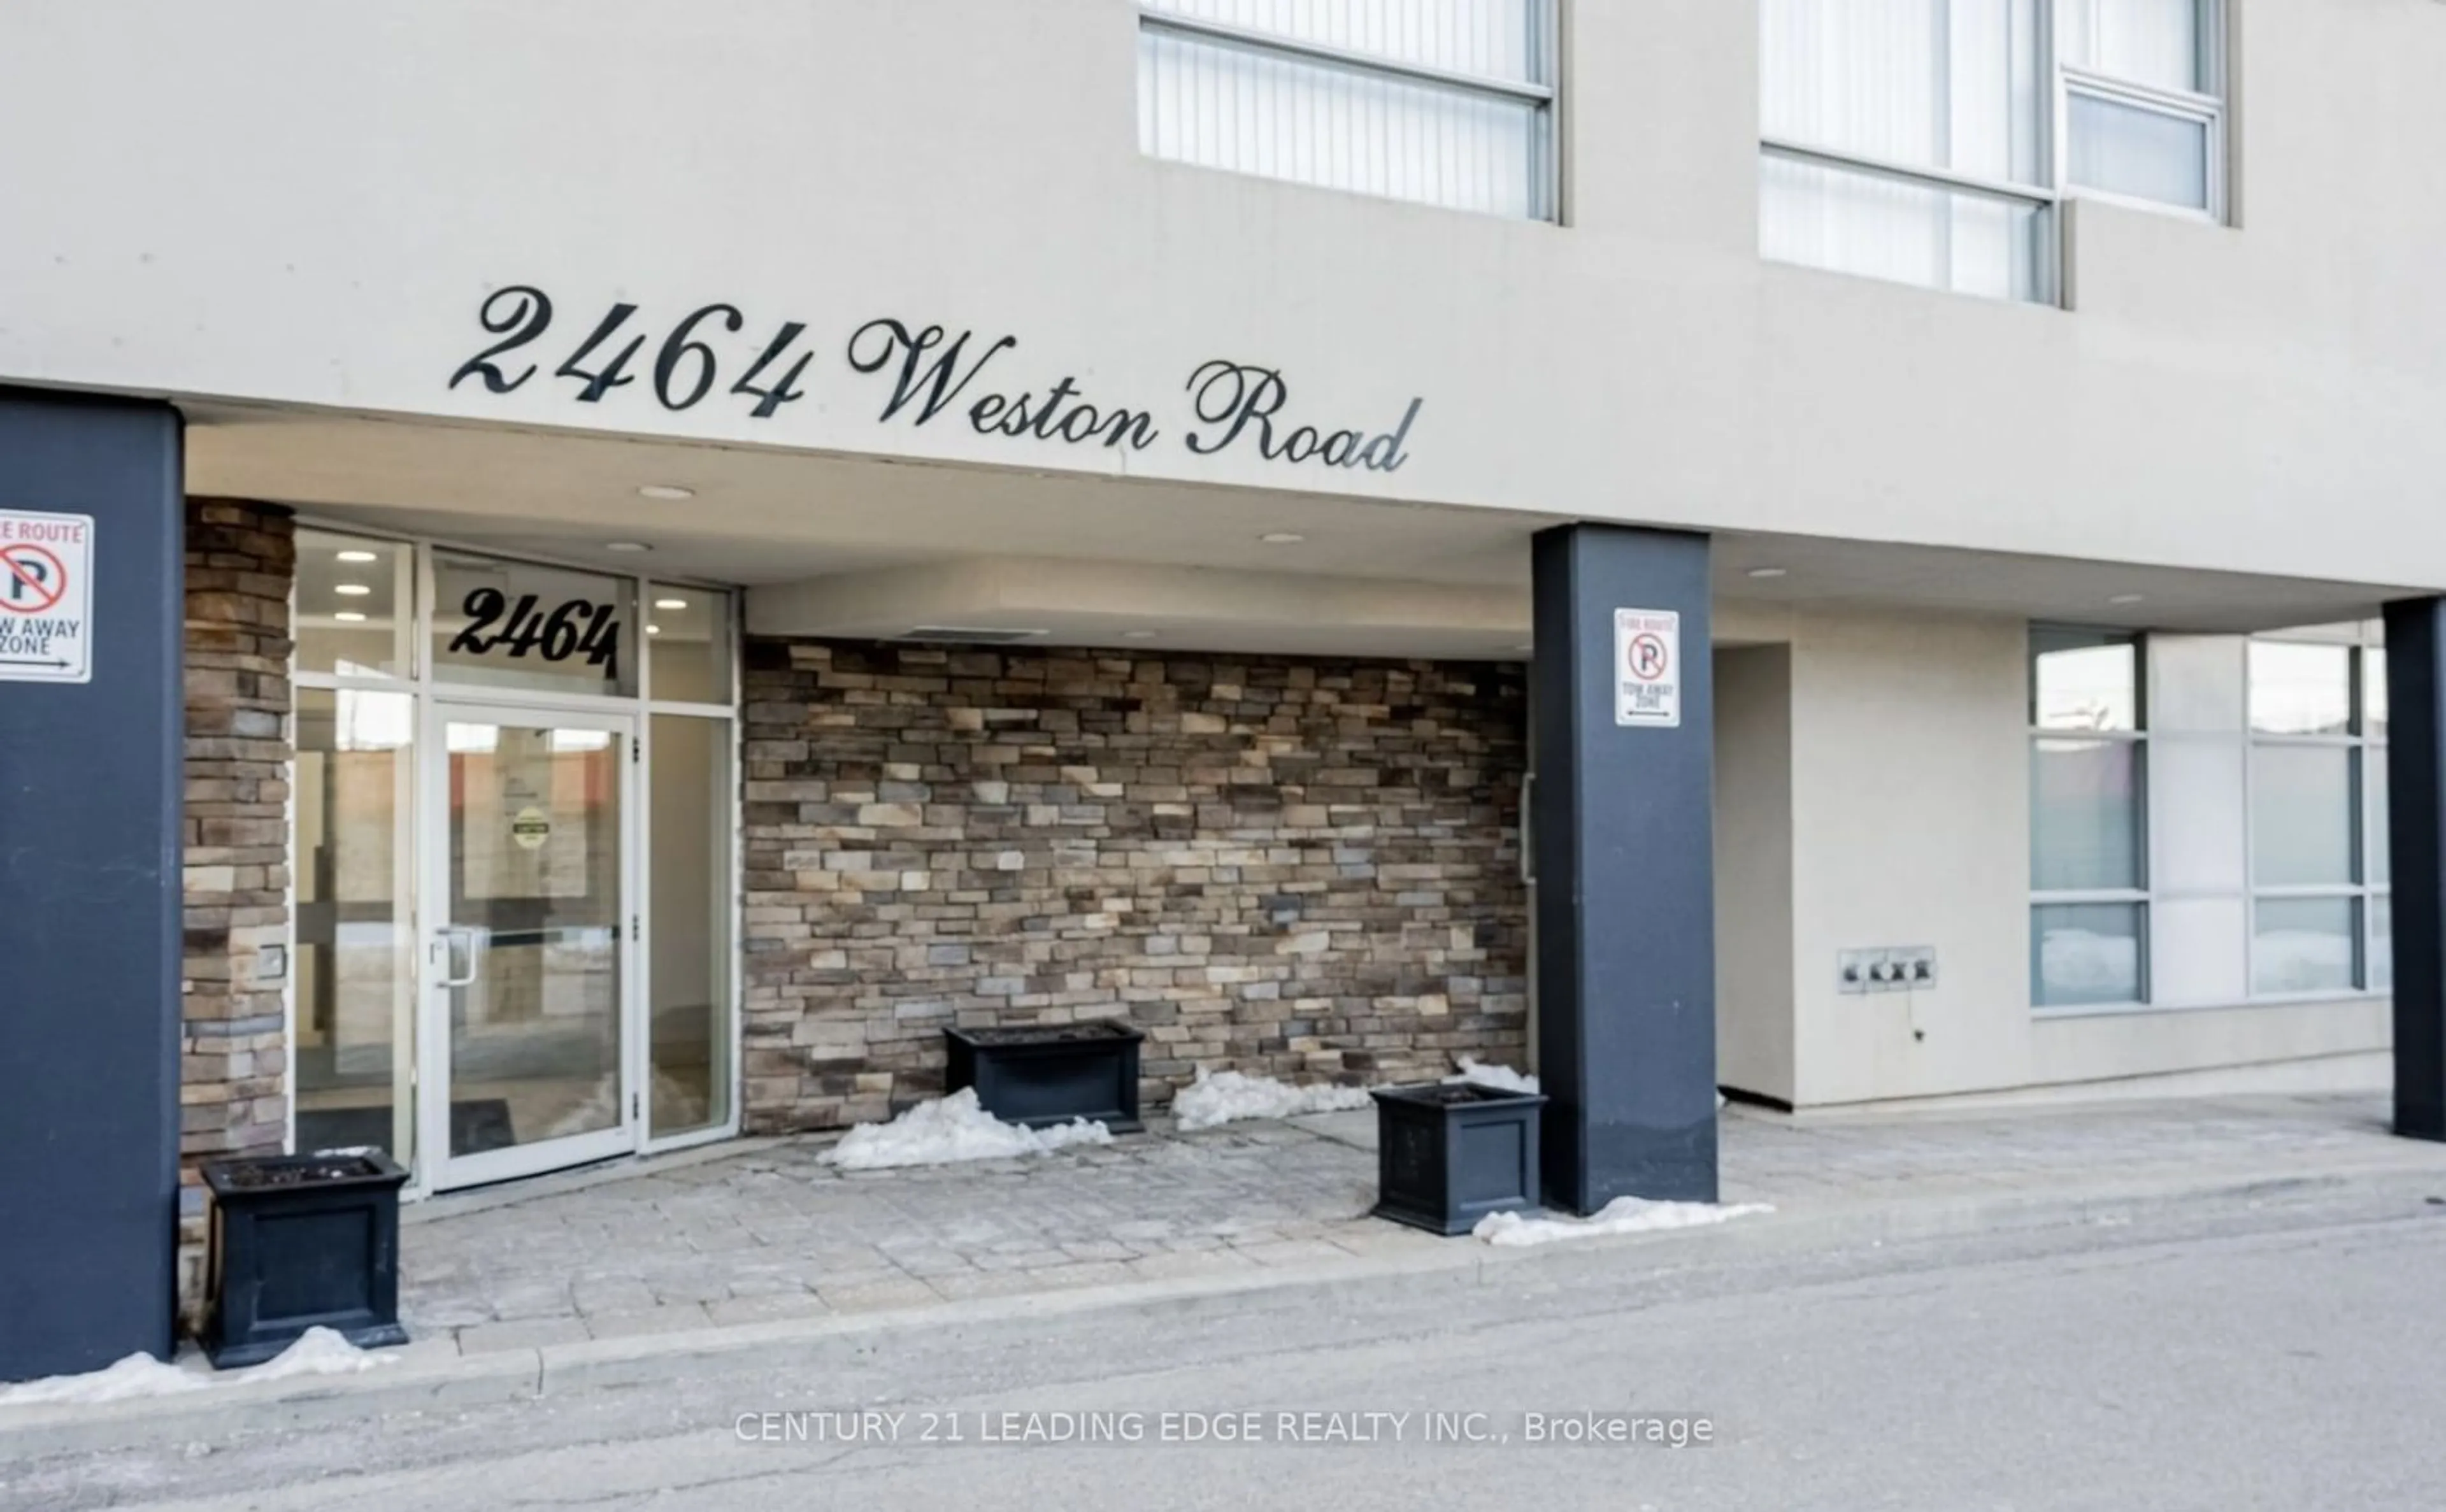 A pic from exterior of the house or condo for 2464 Weston Rd #305, Toronto Ontario M9N 0A2